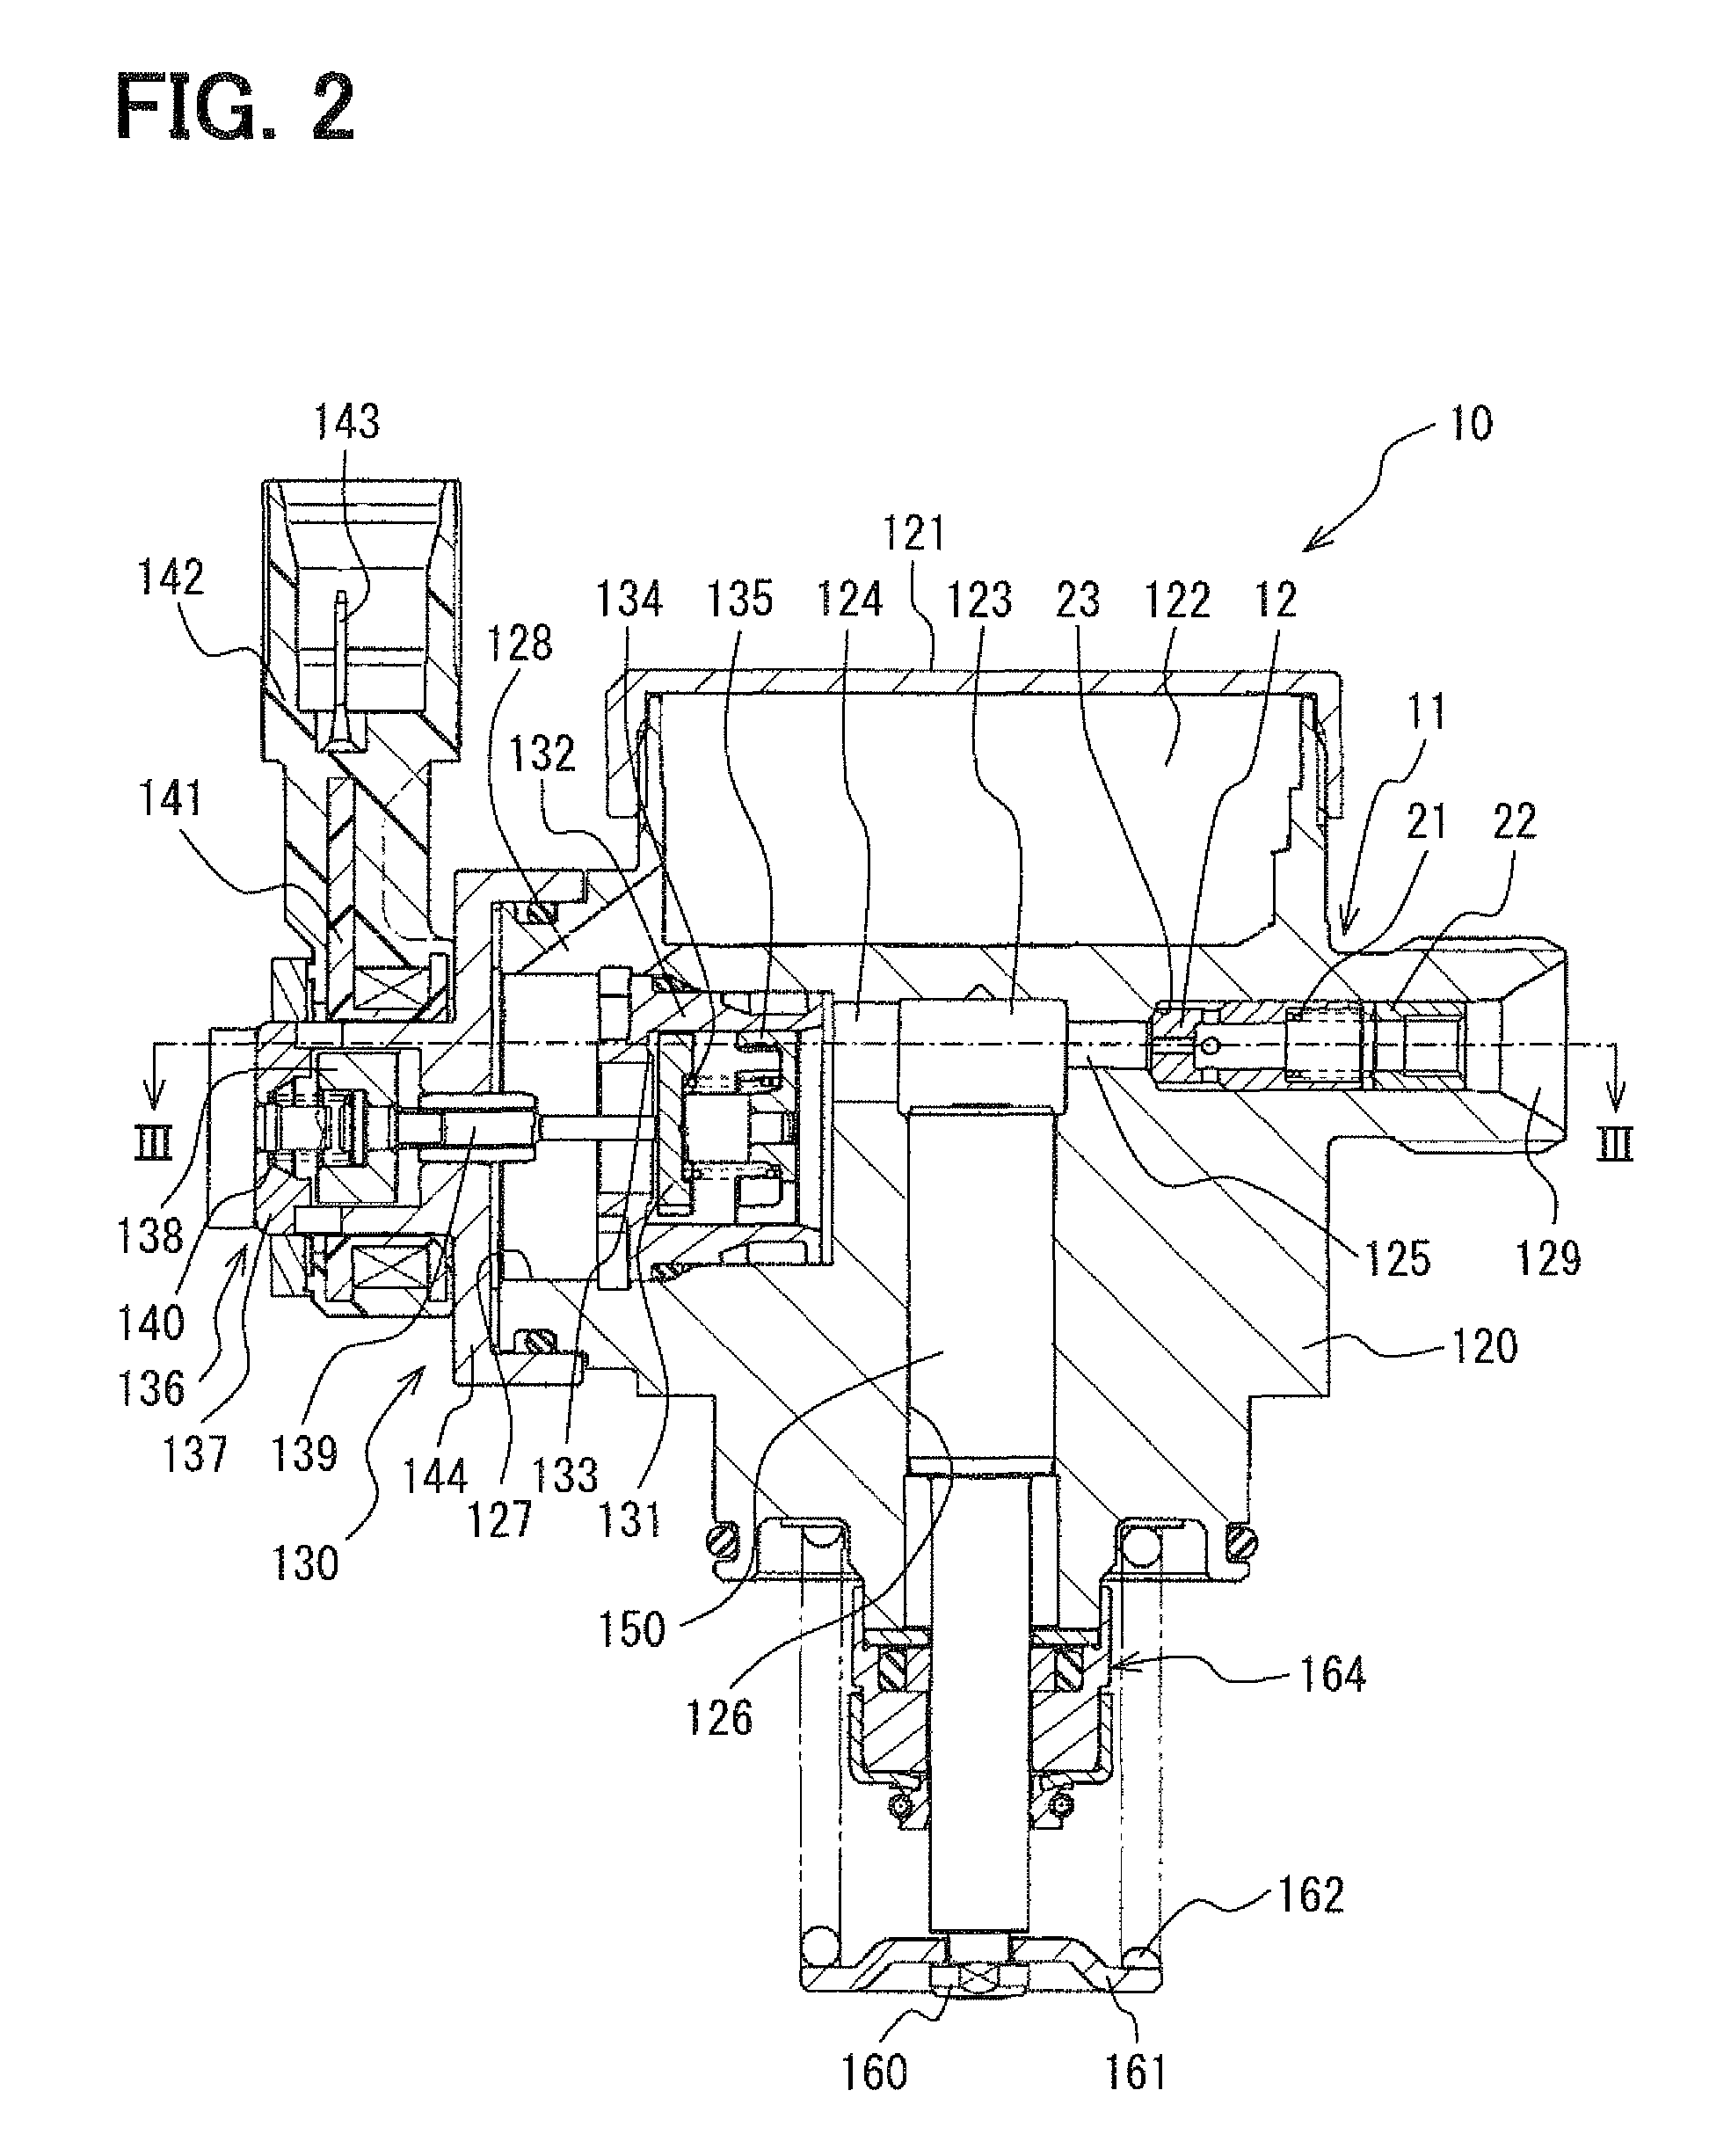 Fuel pump for internal combustion engine